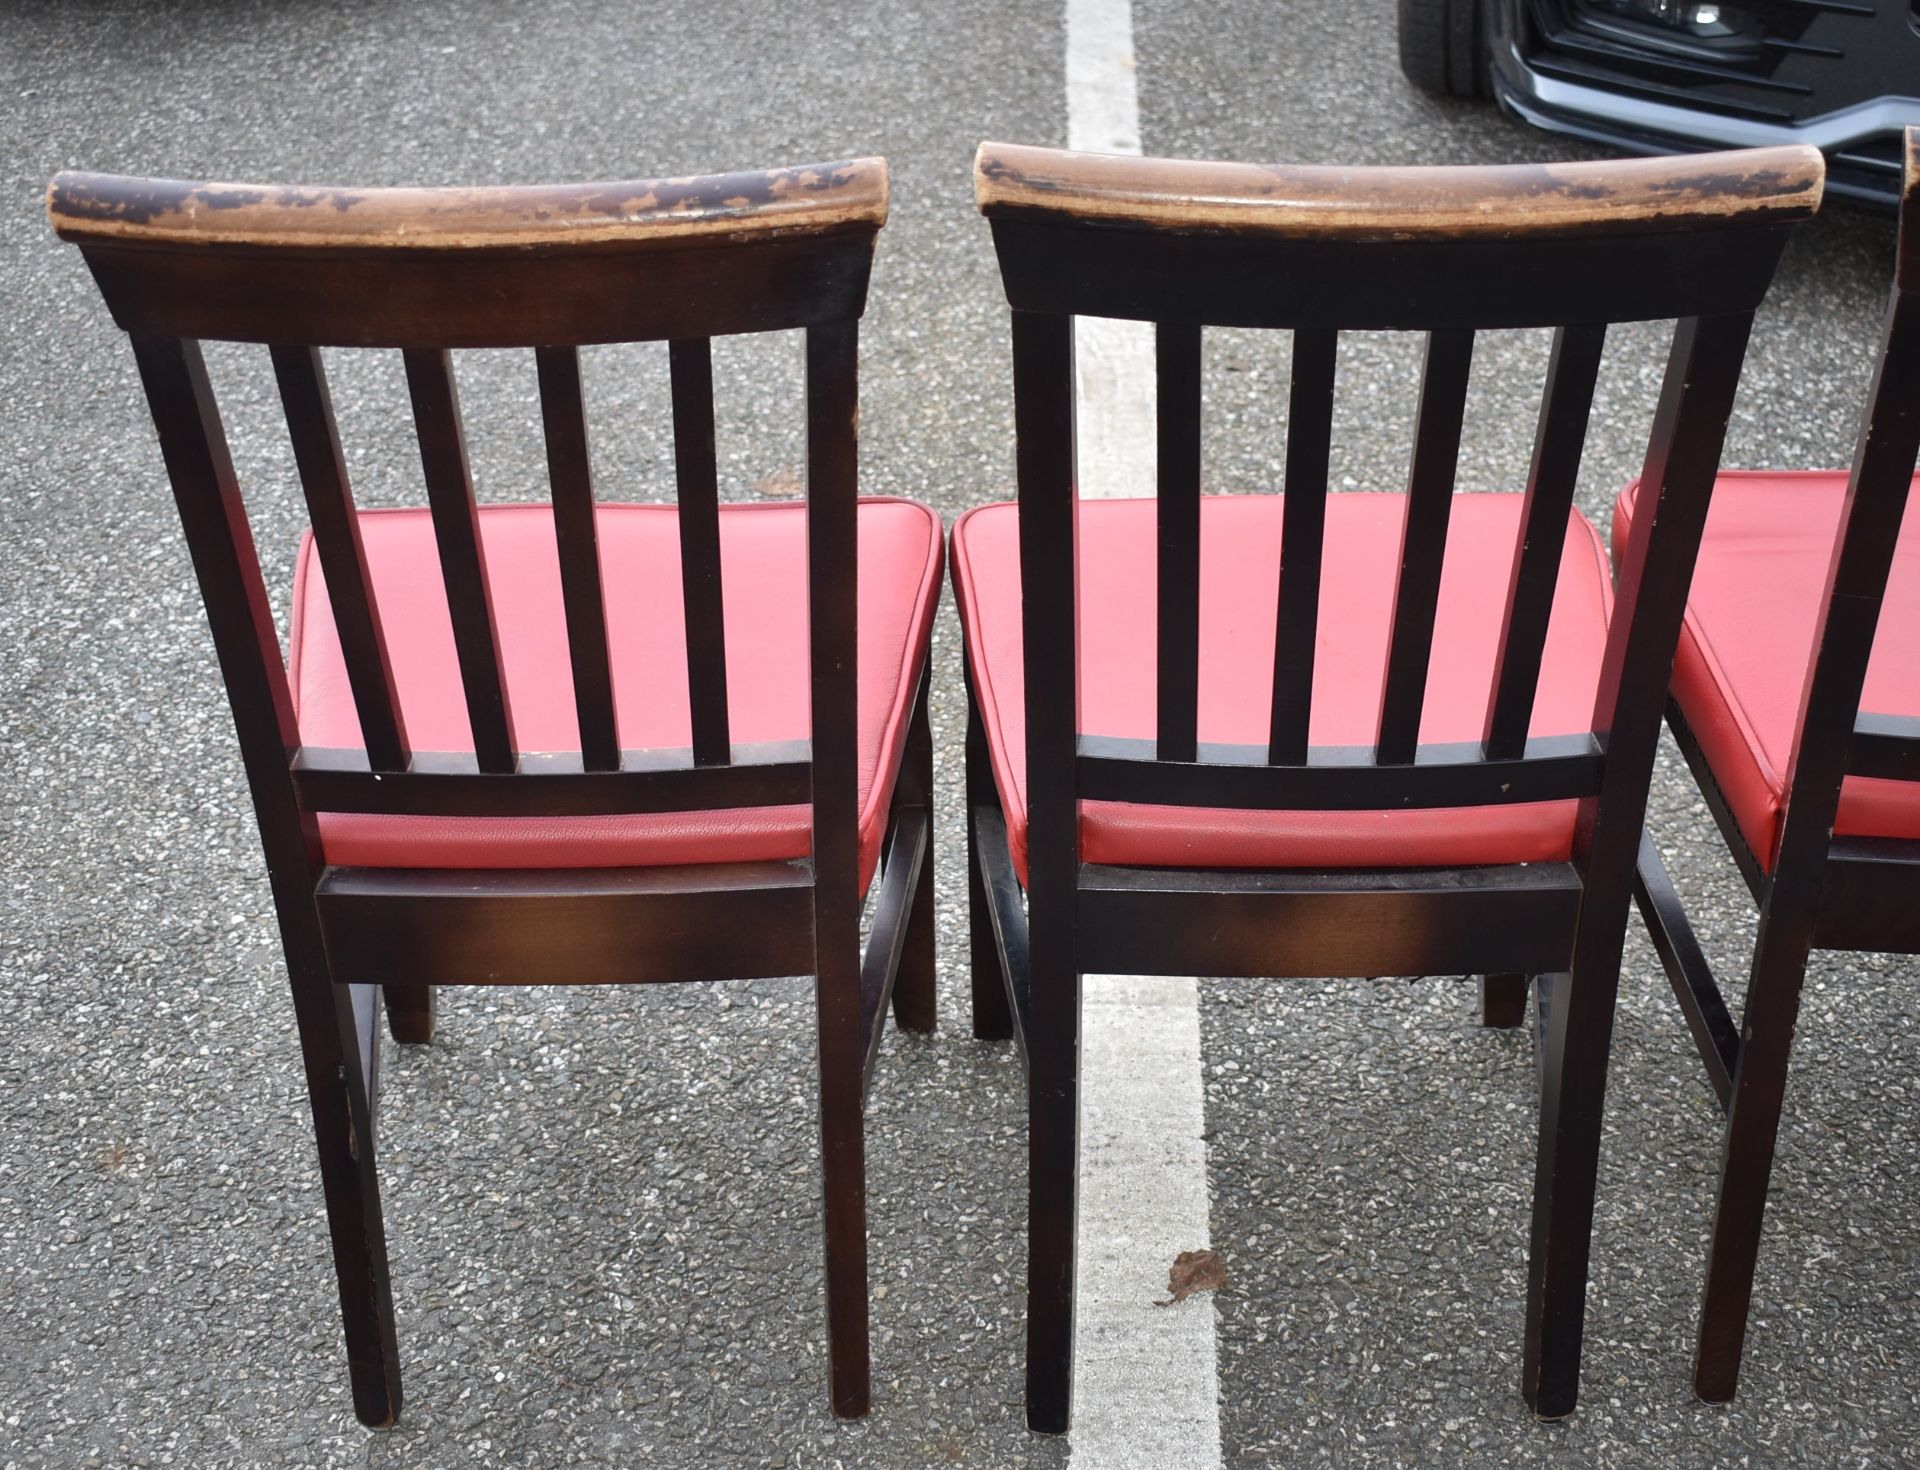 8 x Restaurant Dining Chairs With Dark Stained Wood Finish and Red Leather Seat Pads